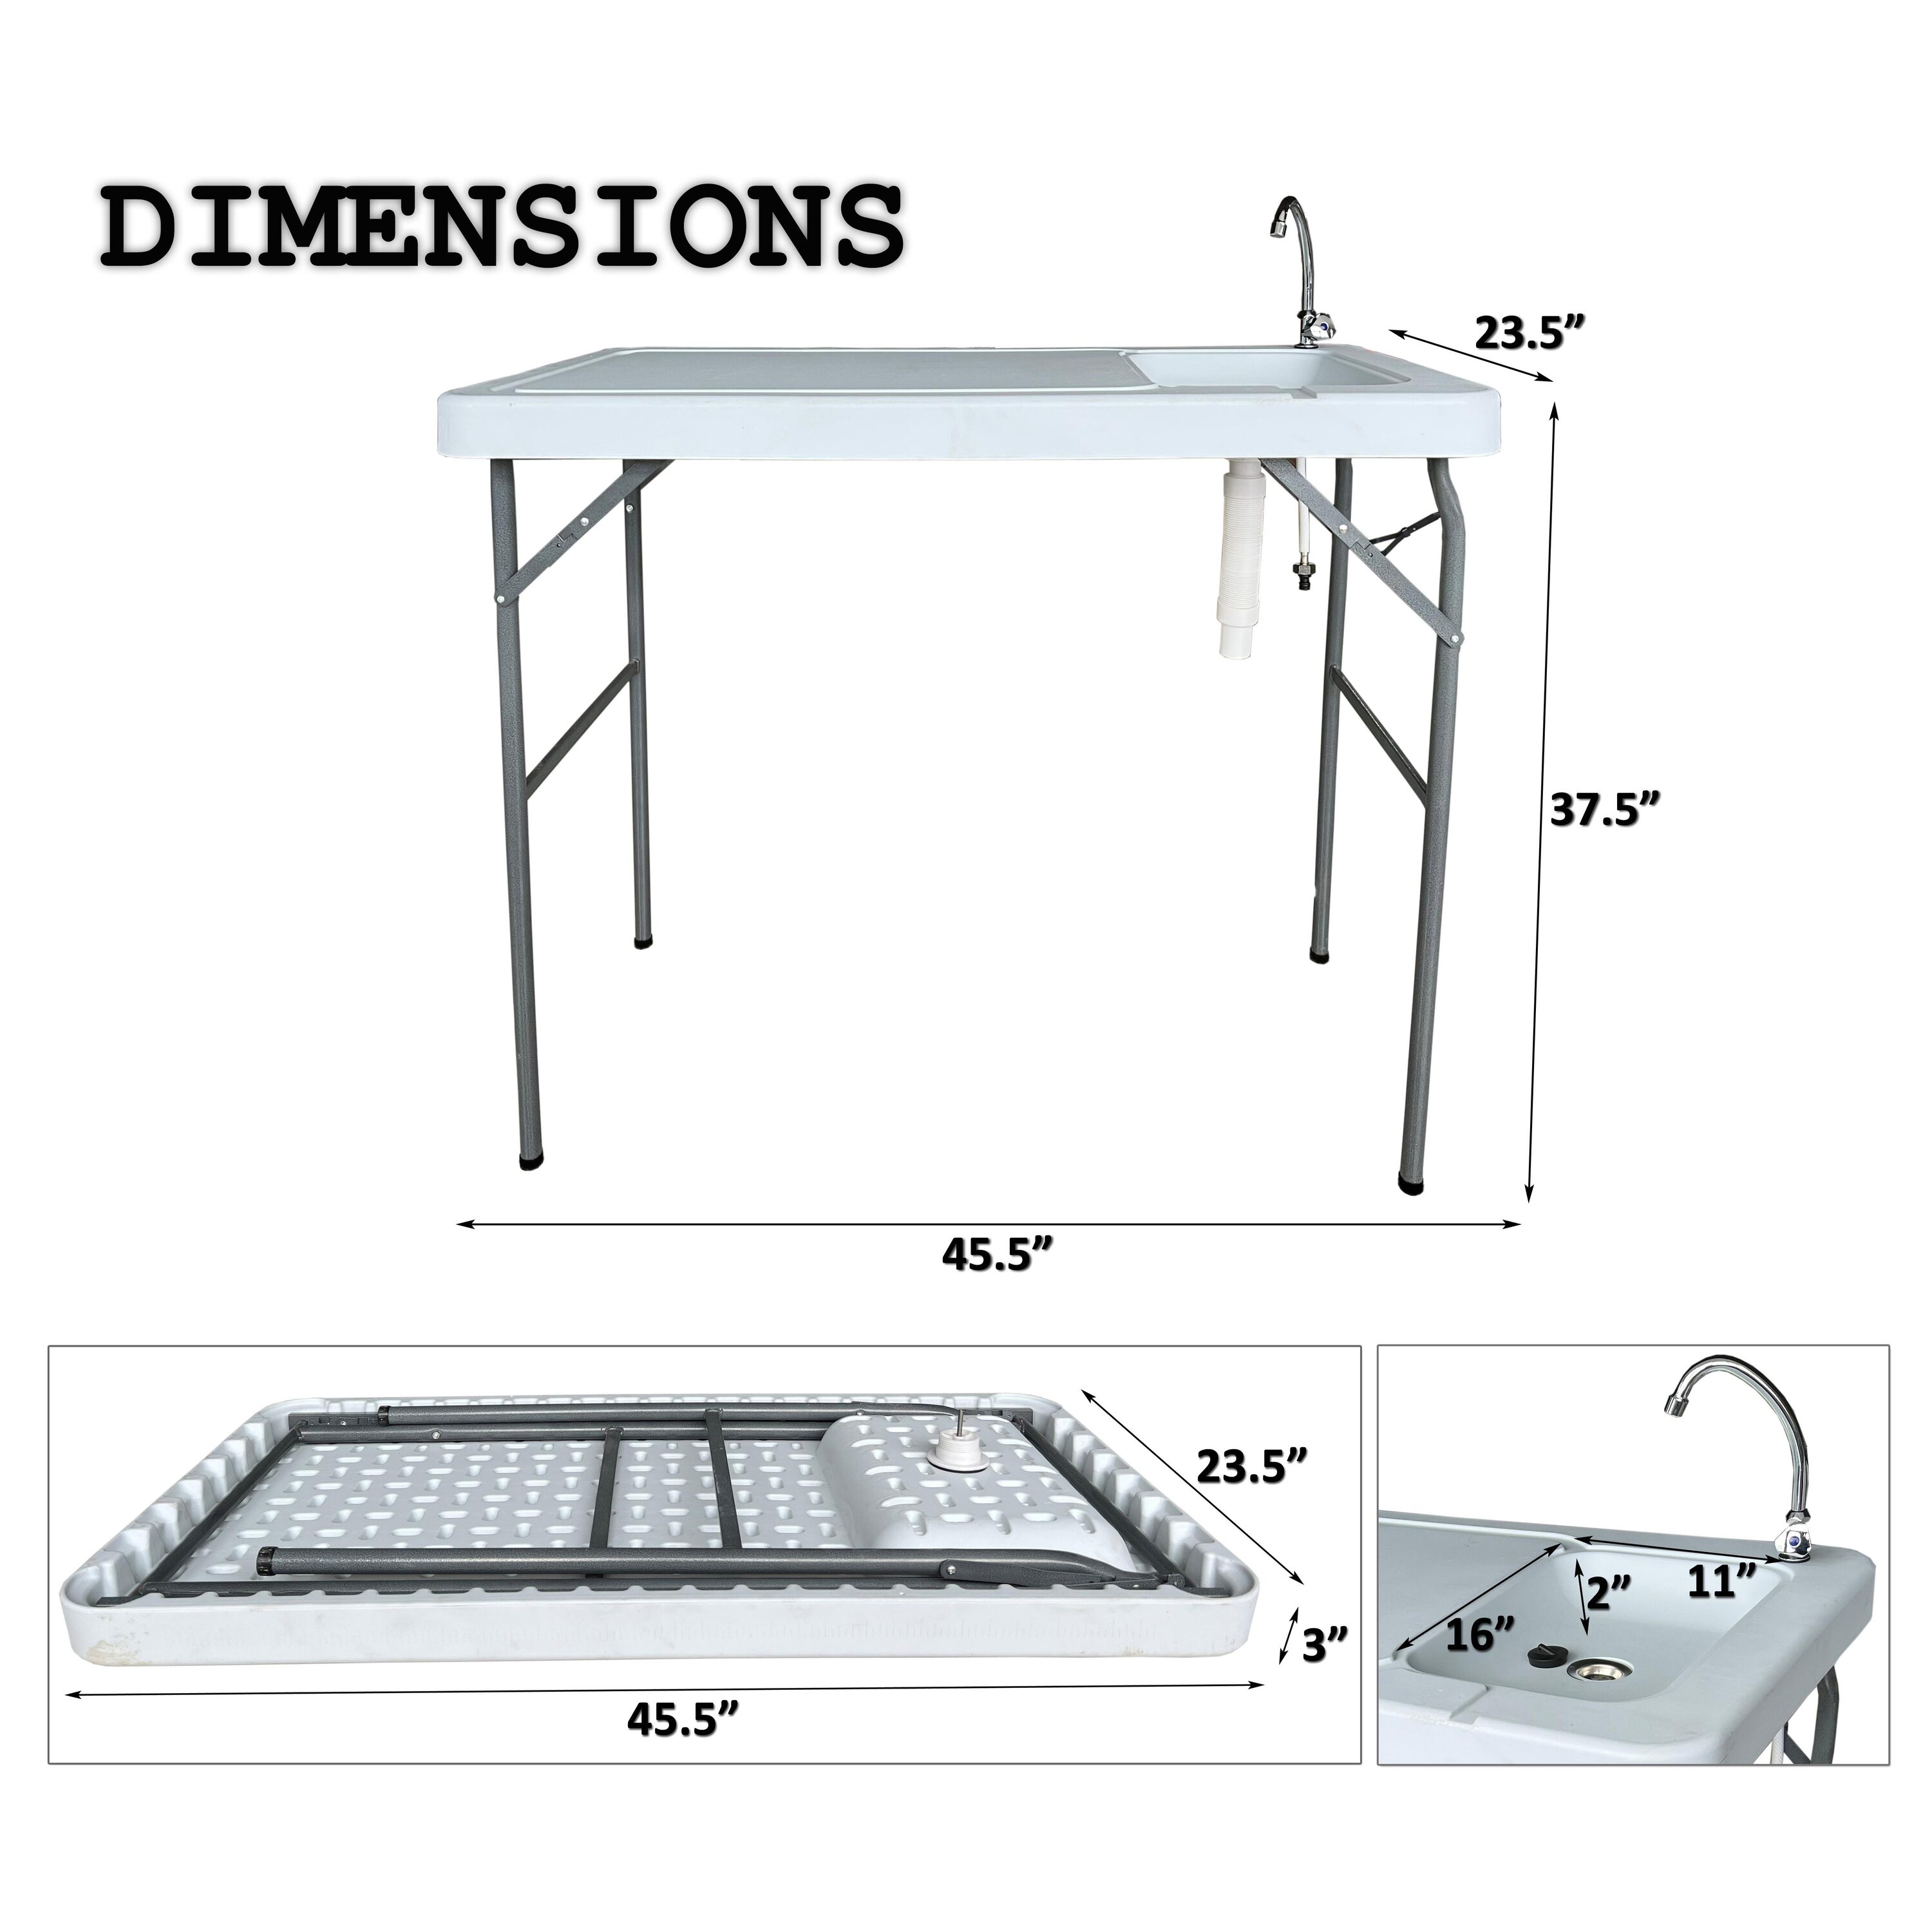 Outdoor Fish and Game Cutting Cleaning Table with Sink and Faucet